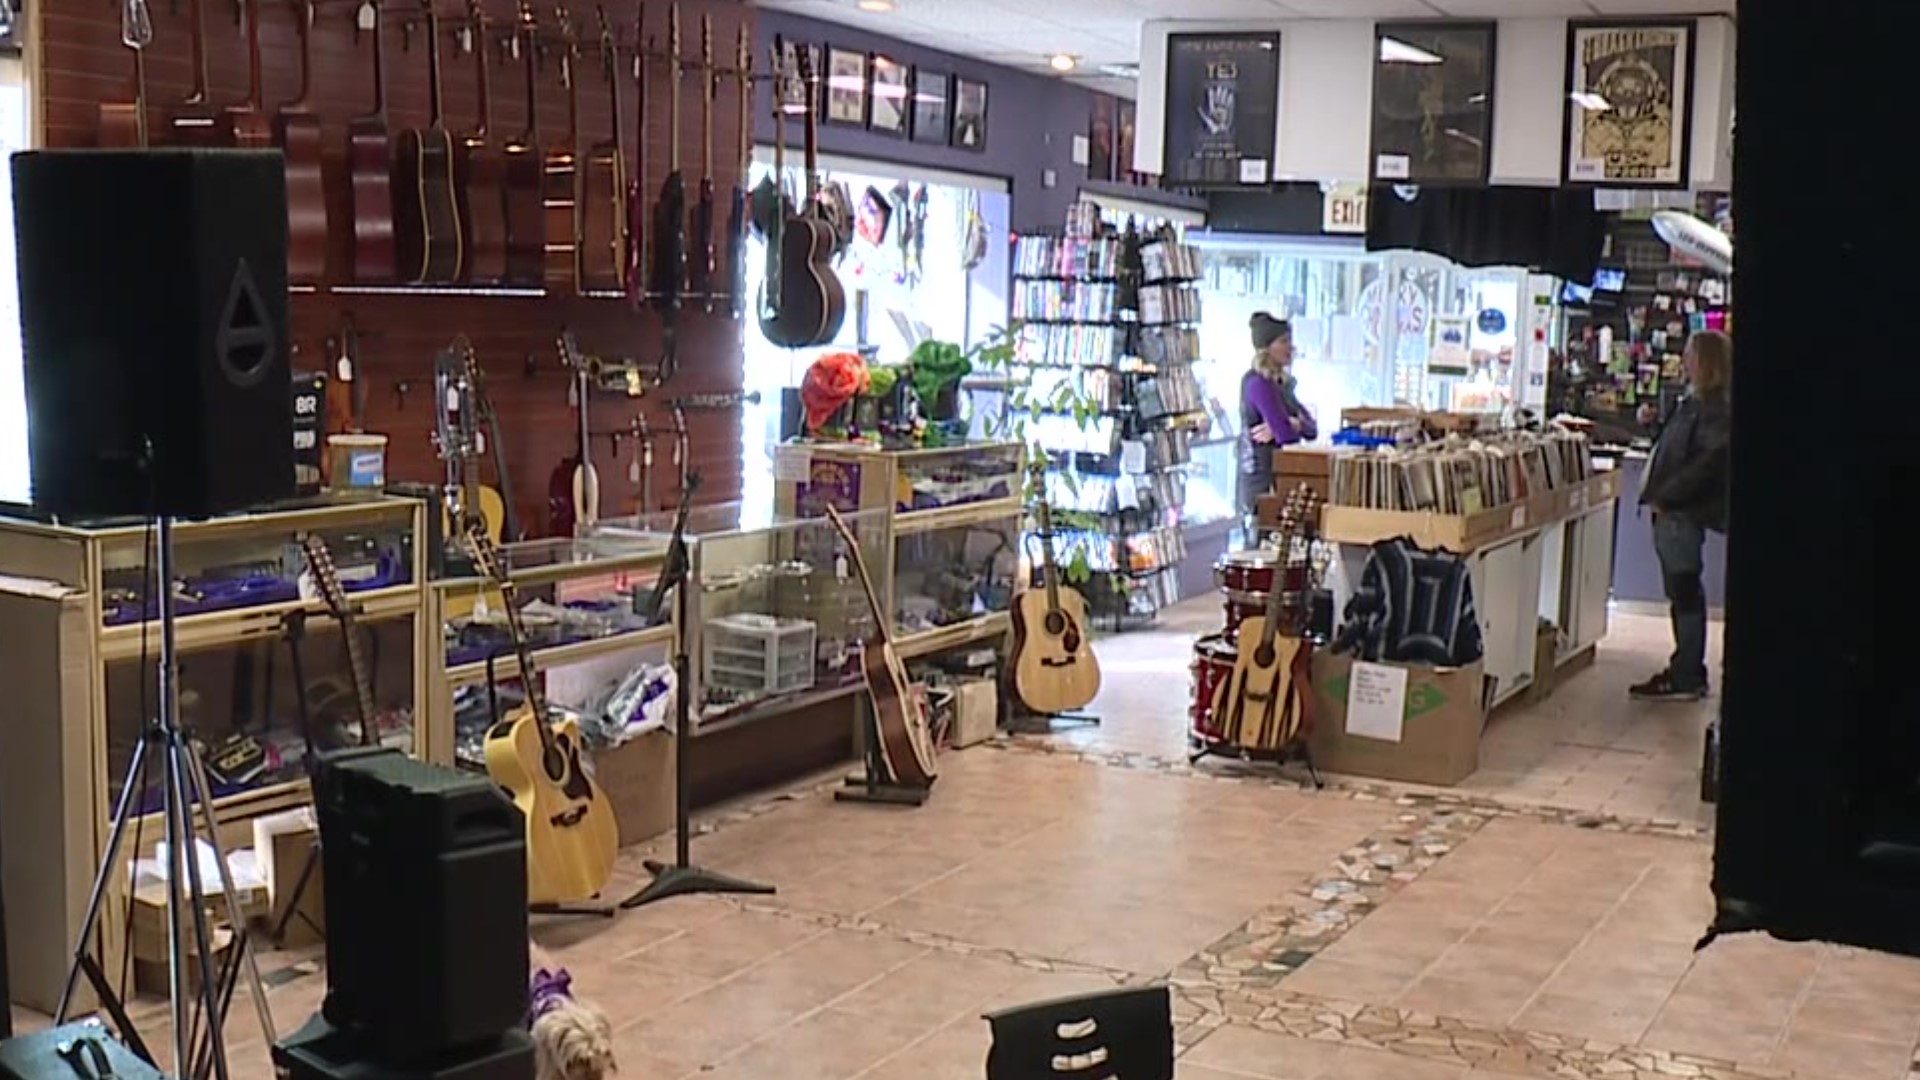 The business in Luzerne County is collecting food and clothing from now until a benefit concert planned at the store.